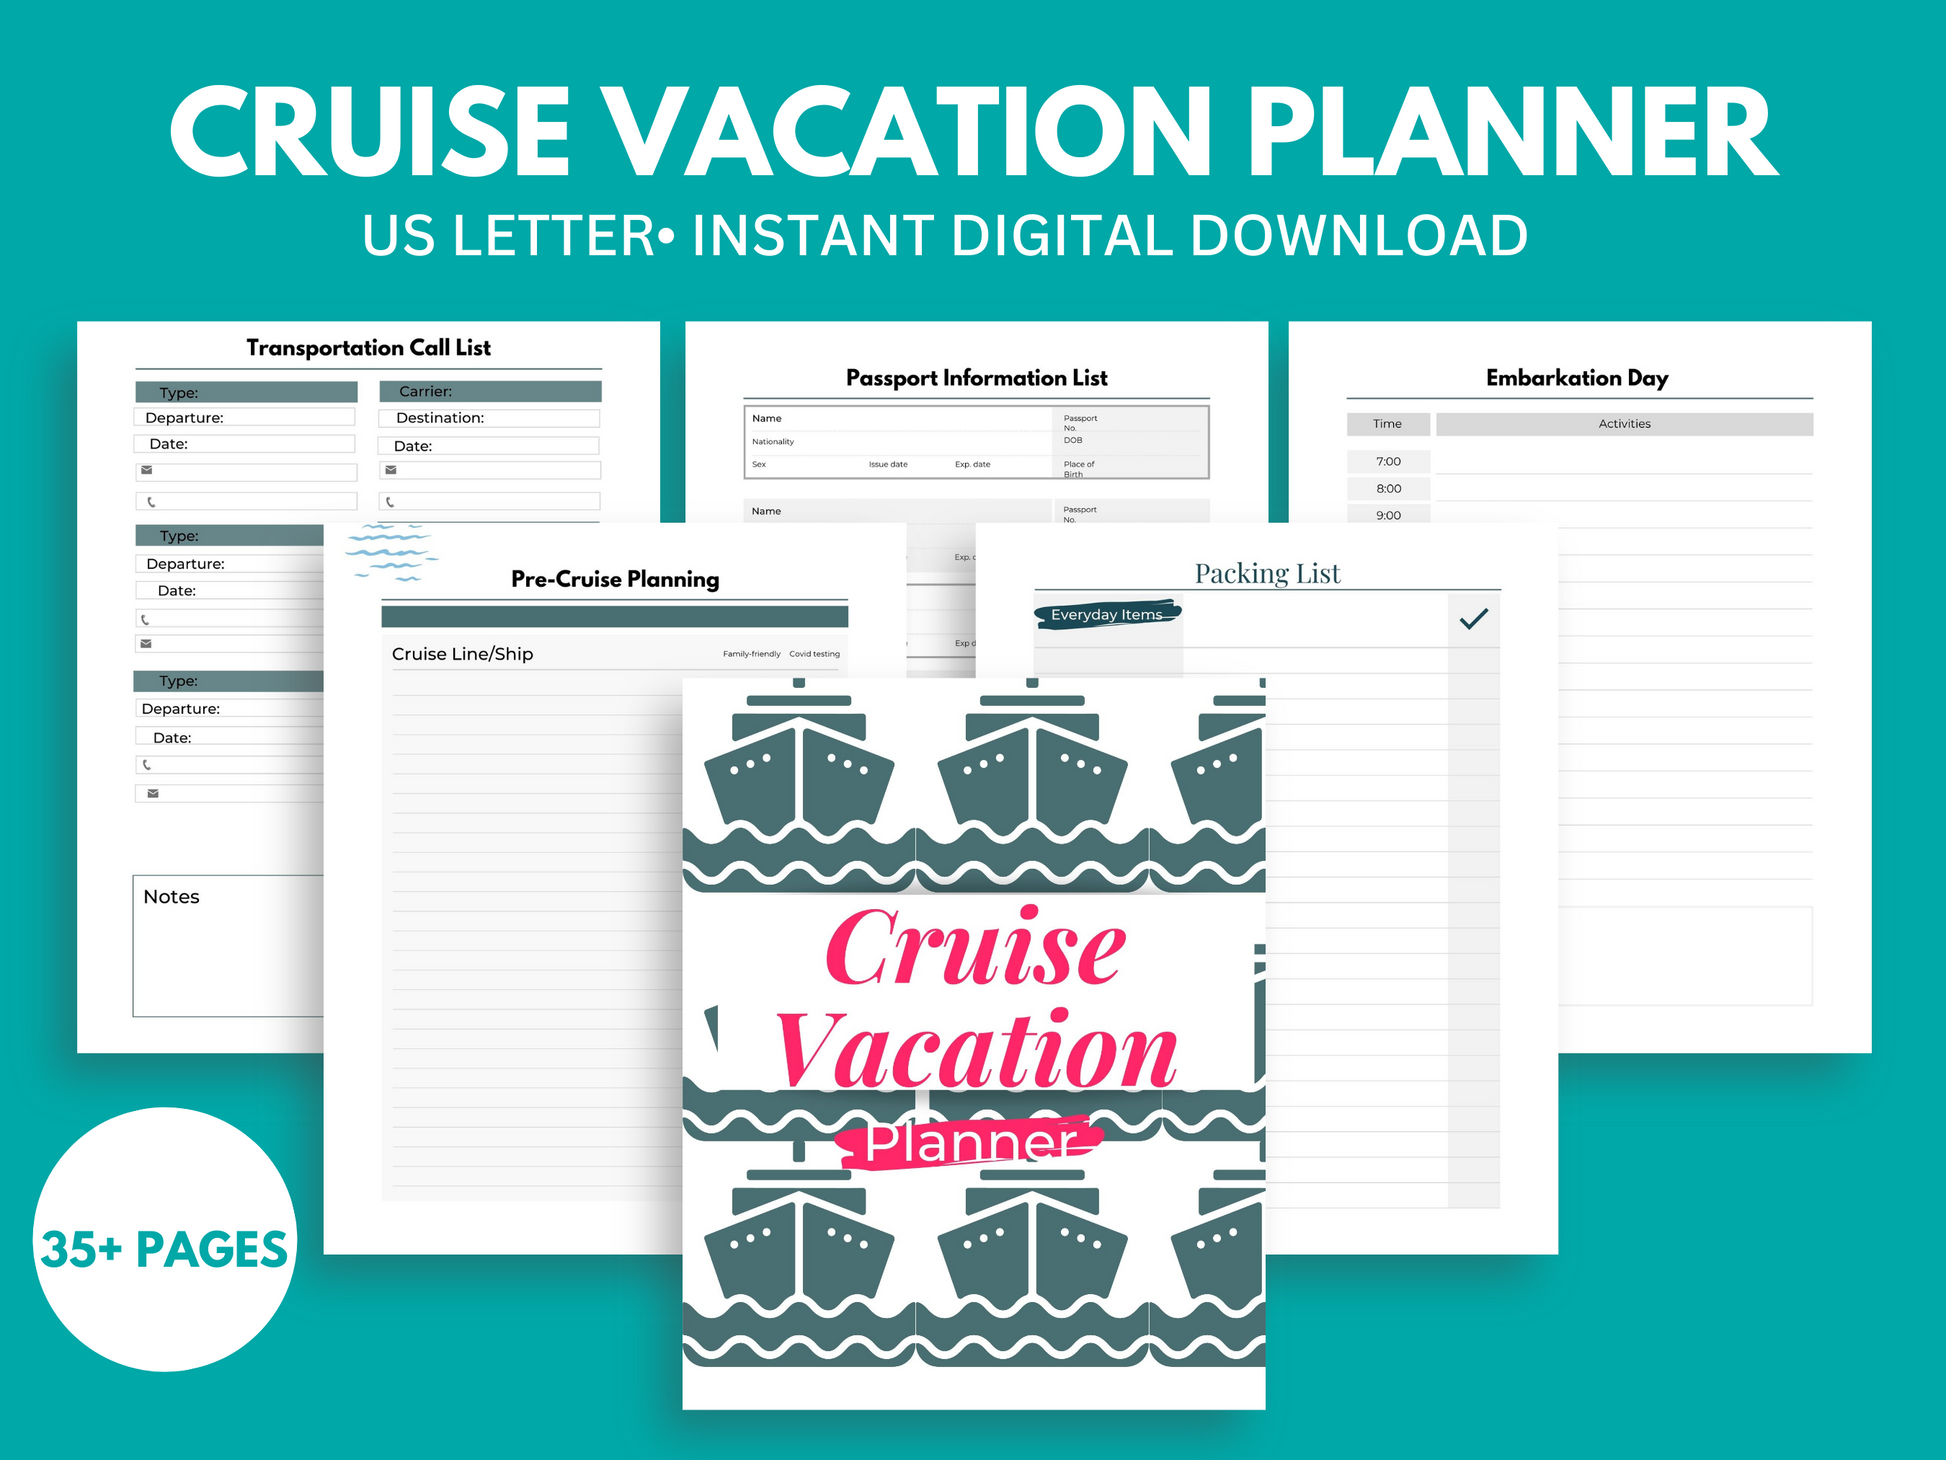 Cruise vacation planner with 6 pages shown including the title in green and white.